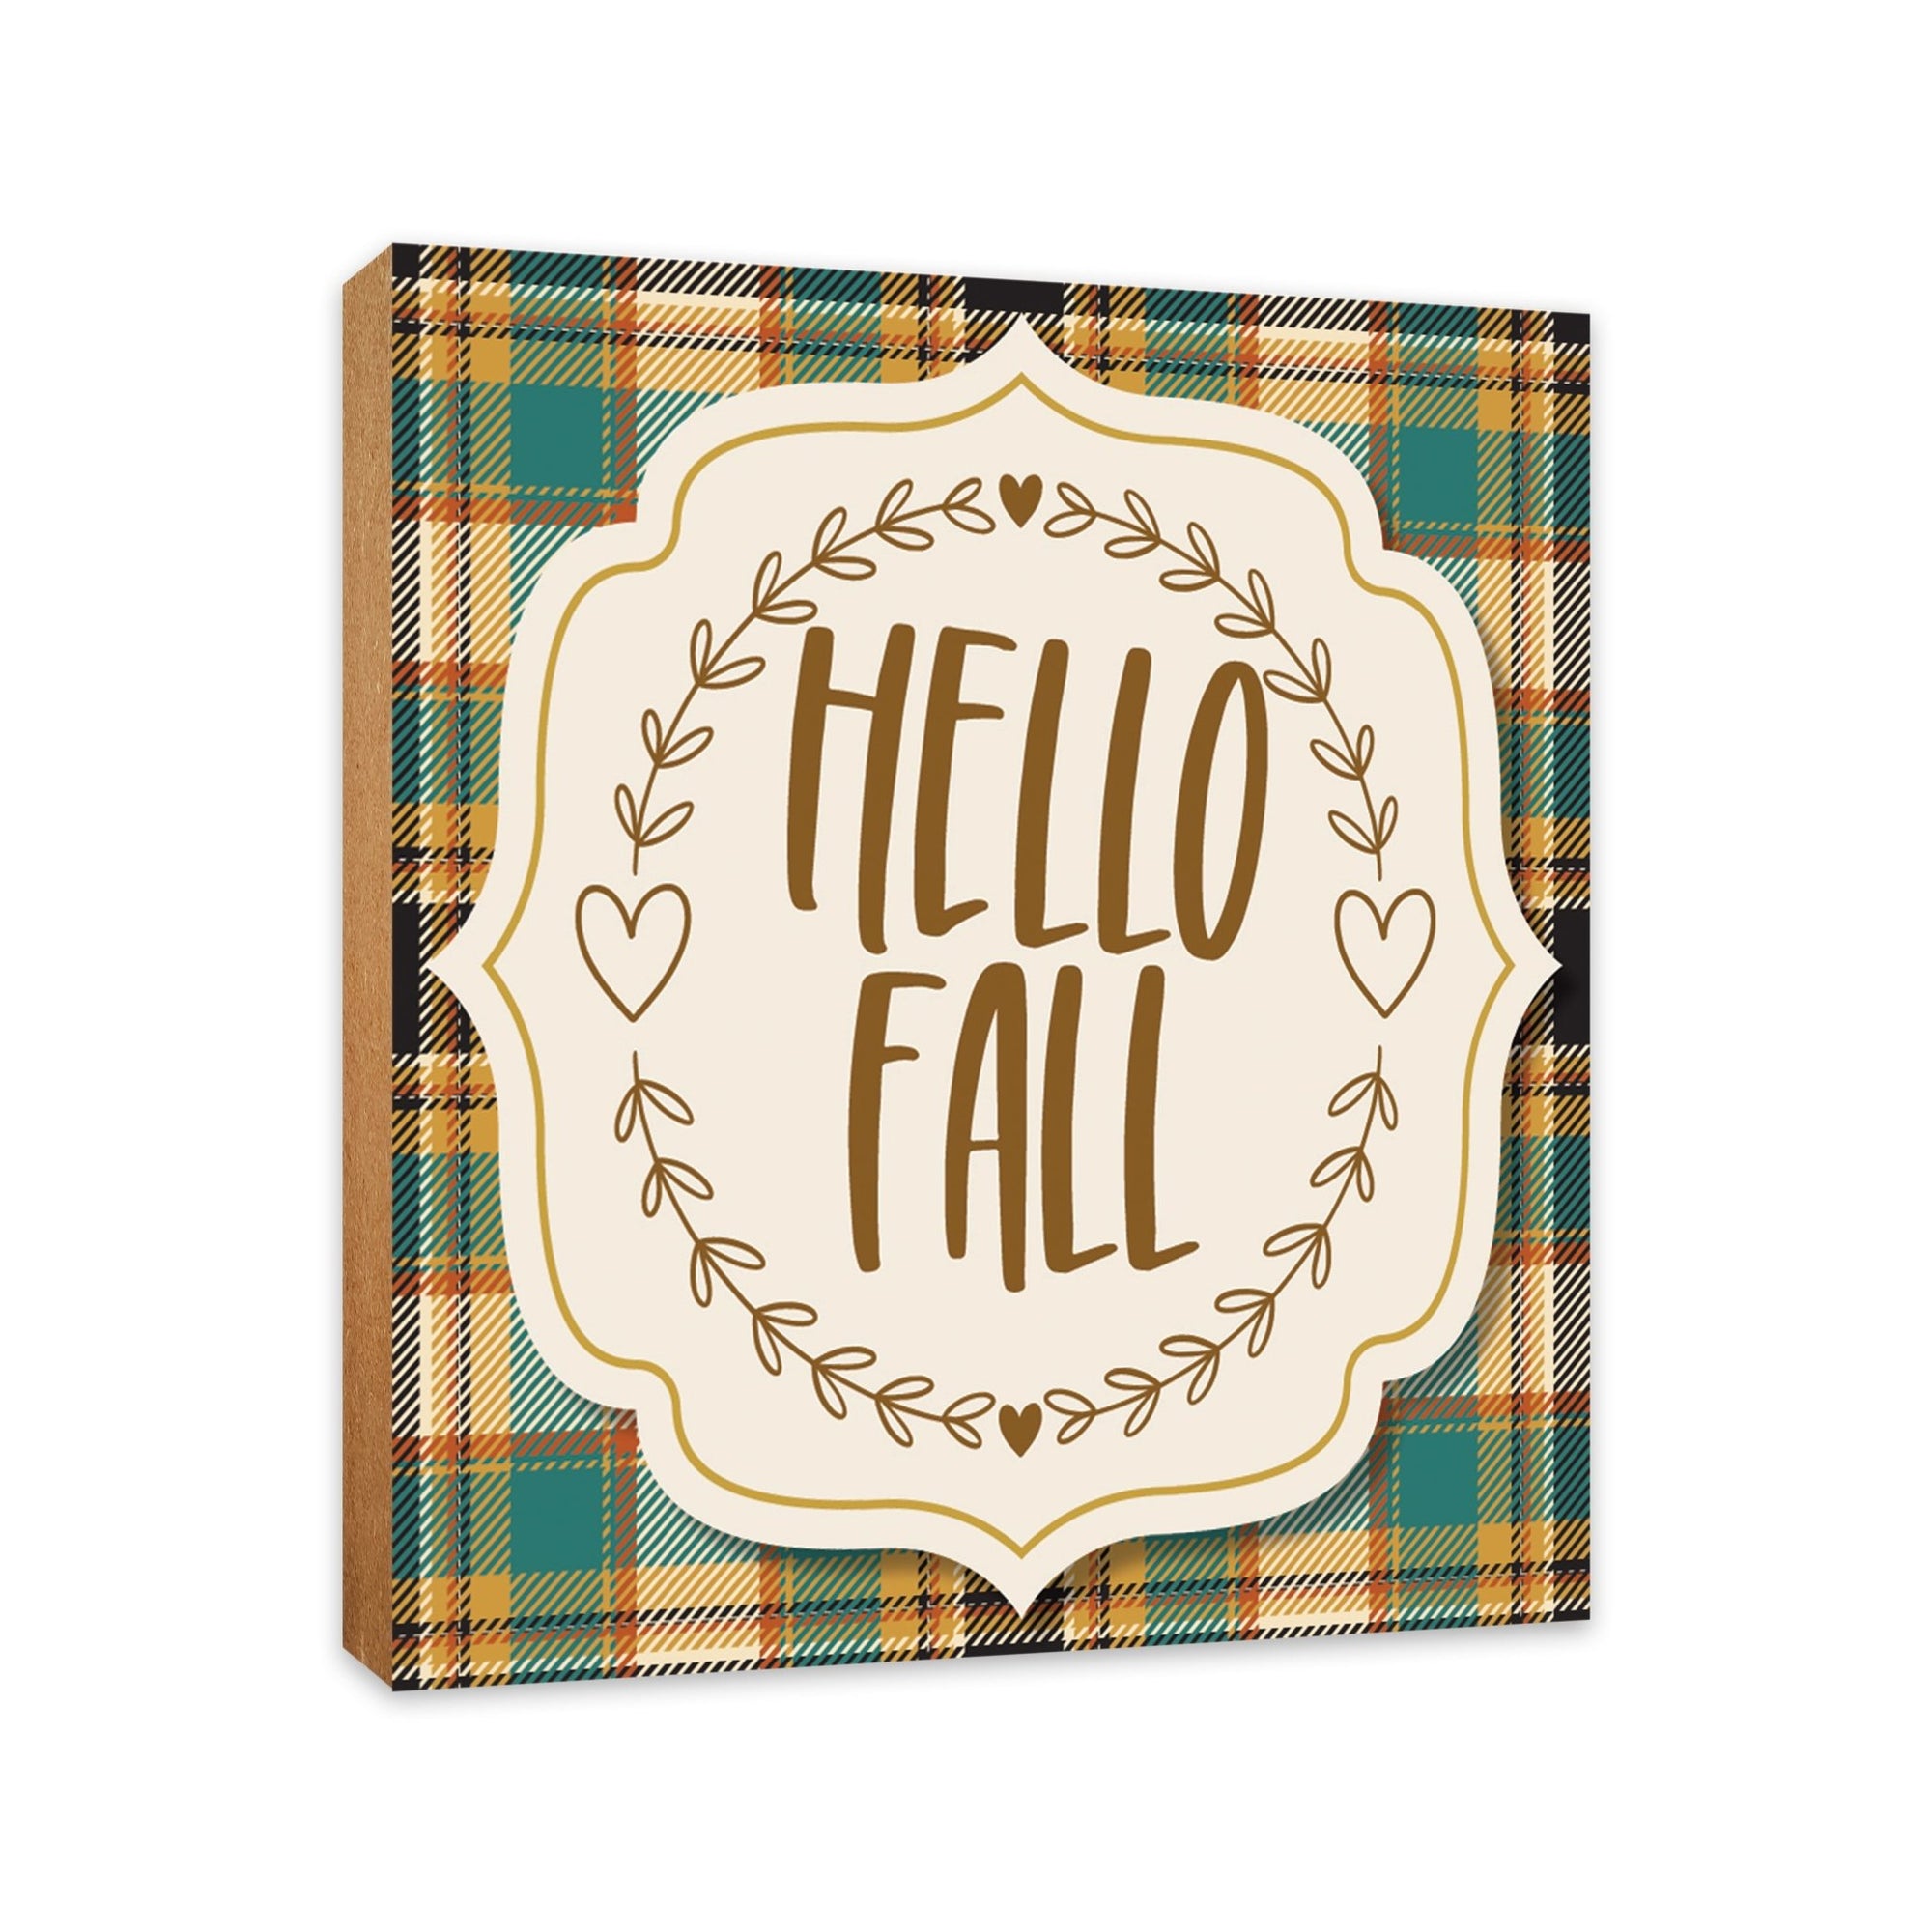 Rustic shelf decor with a collection of handcrafted wooden inspirational fall signs for a cozy autumn atmosphere.